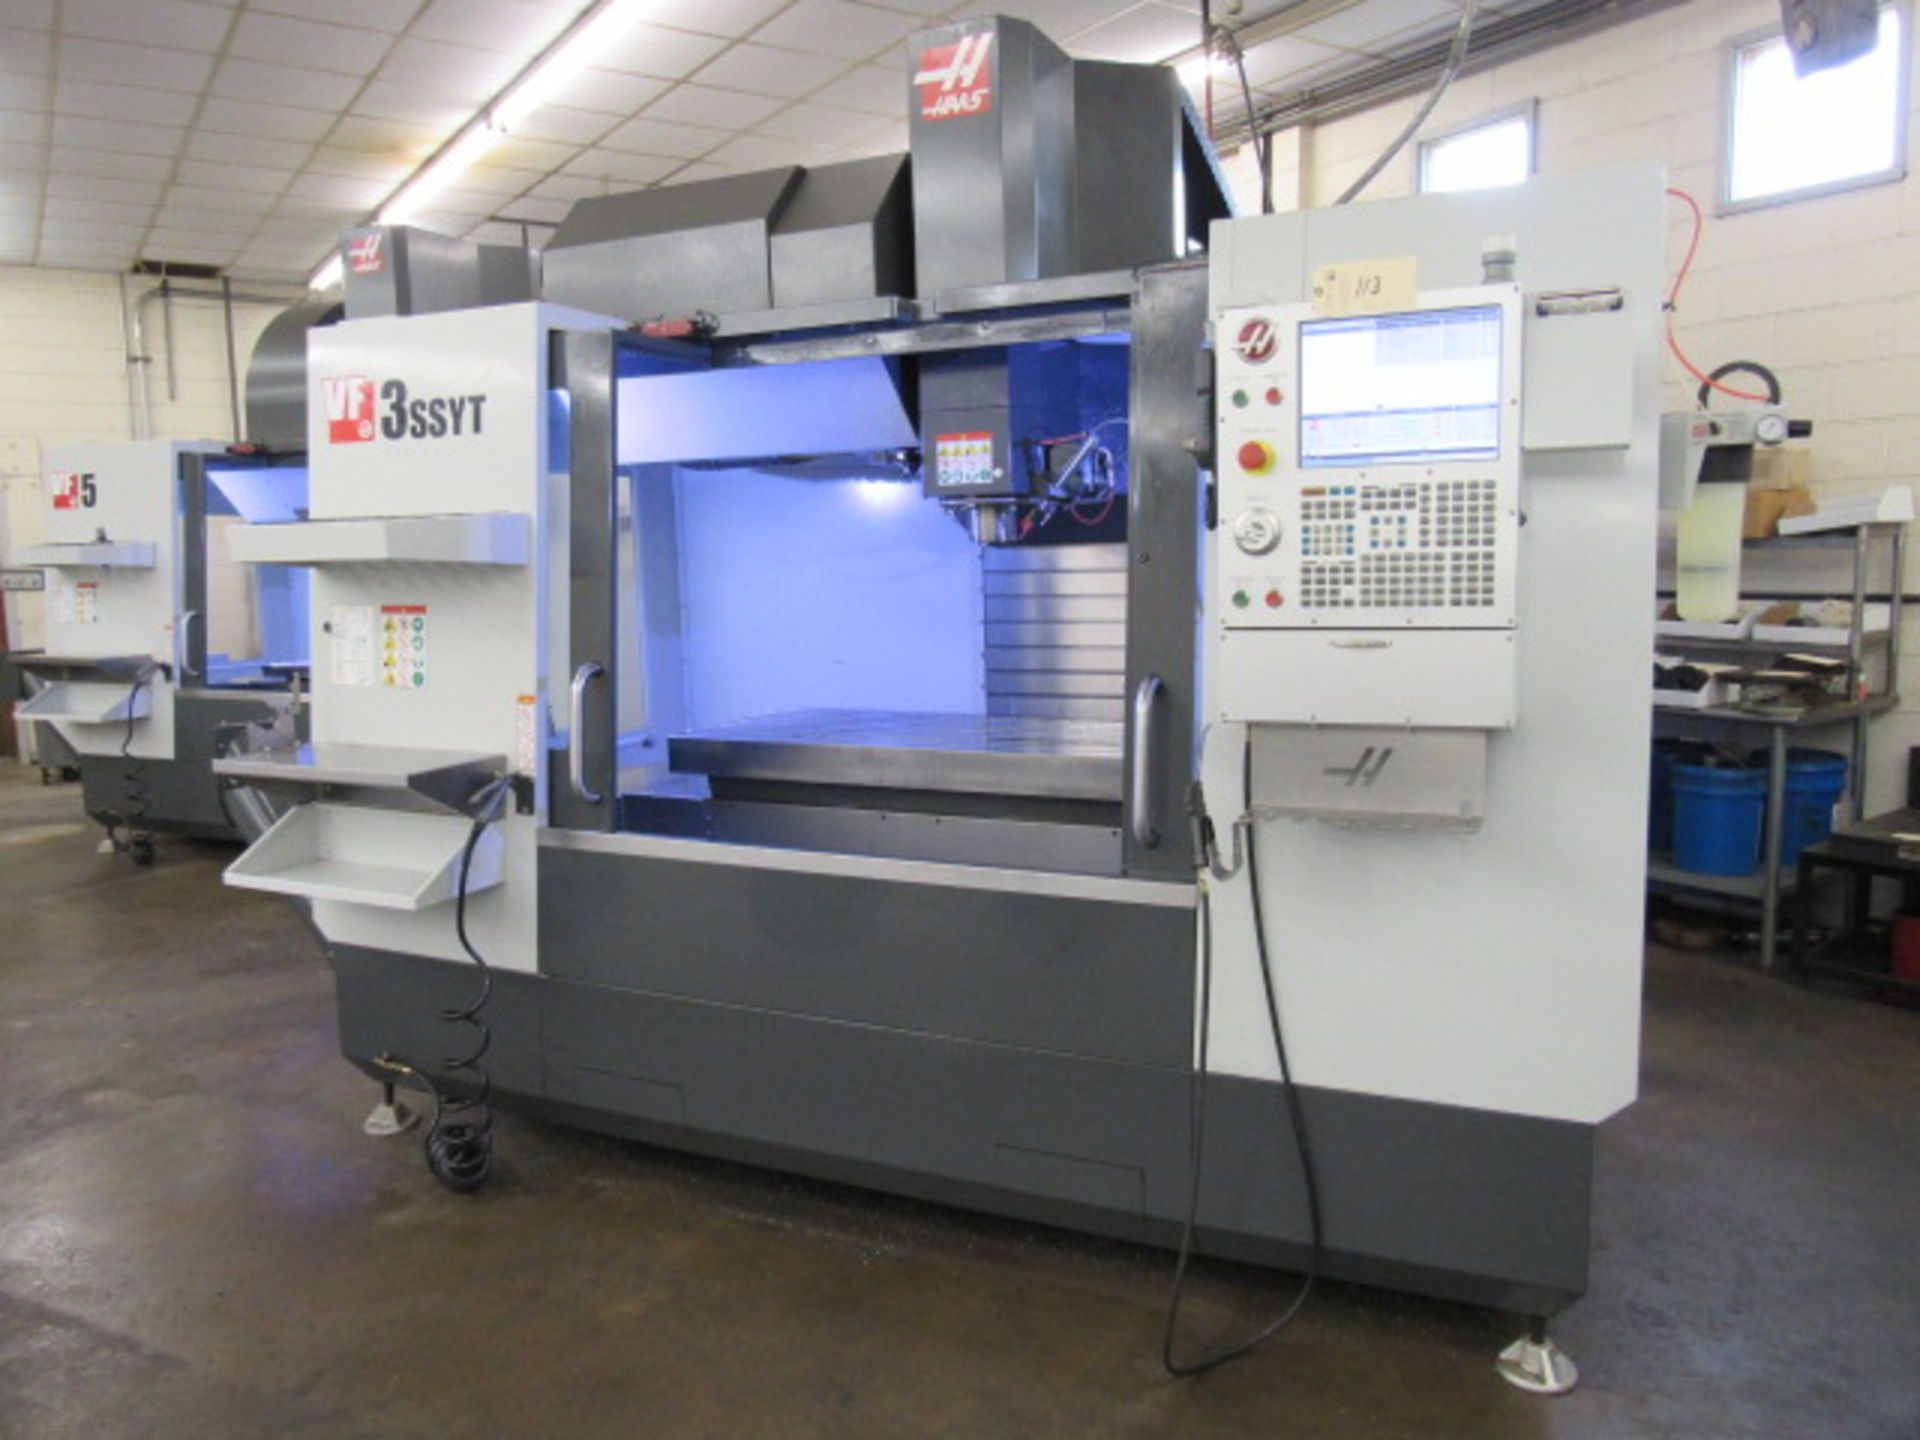 2018 HAAS VF-3SSYT CNC Vertical Machining Center - Image 5 of 9